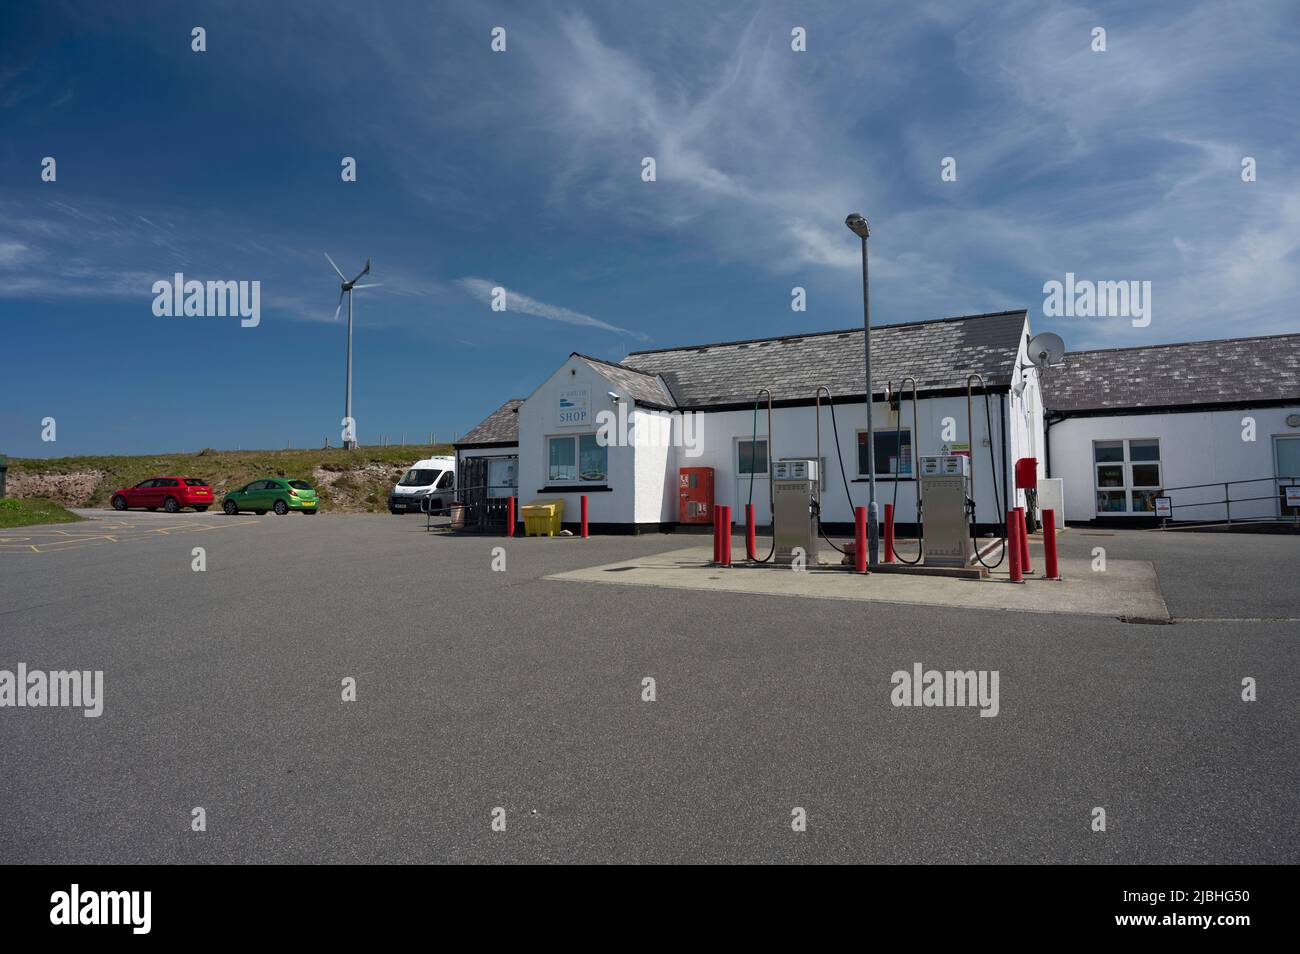 Exterior of Uig community shop and petrol station. No people, sunny day with blue sky and clouds. Isle of Lewis, Outer Hebrides, Scotland, UK. Stock Photo